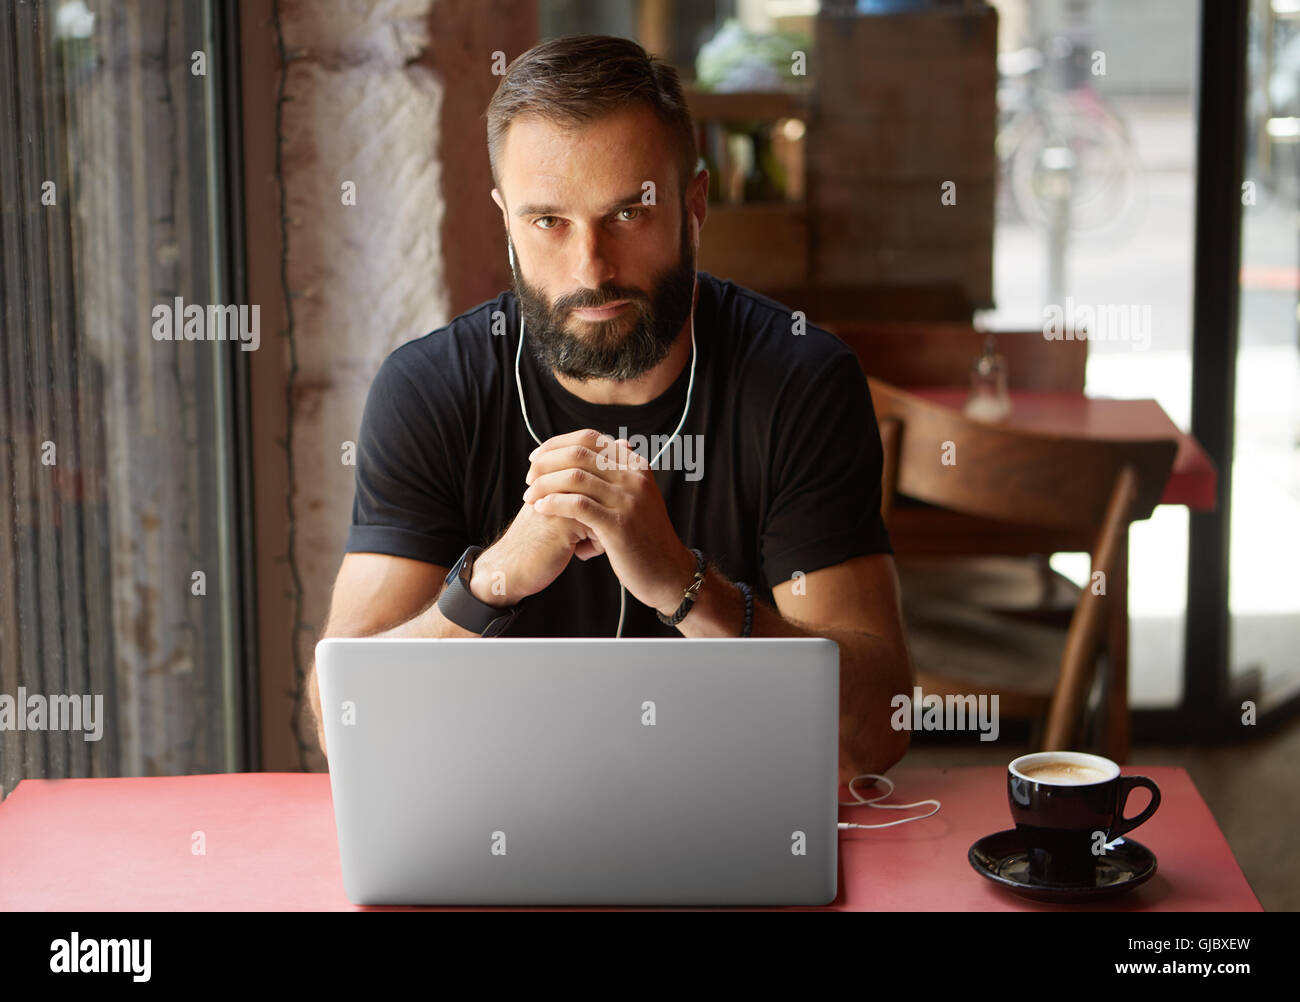 Handsome Young Bearded Businessman Wearing Black Tshirt Working Laptop Urban Cafe.Man Sitting Wood Table Cup Coffee Listening Music.Coworking Process Business Startup.Blurred Background. Stock Photo